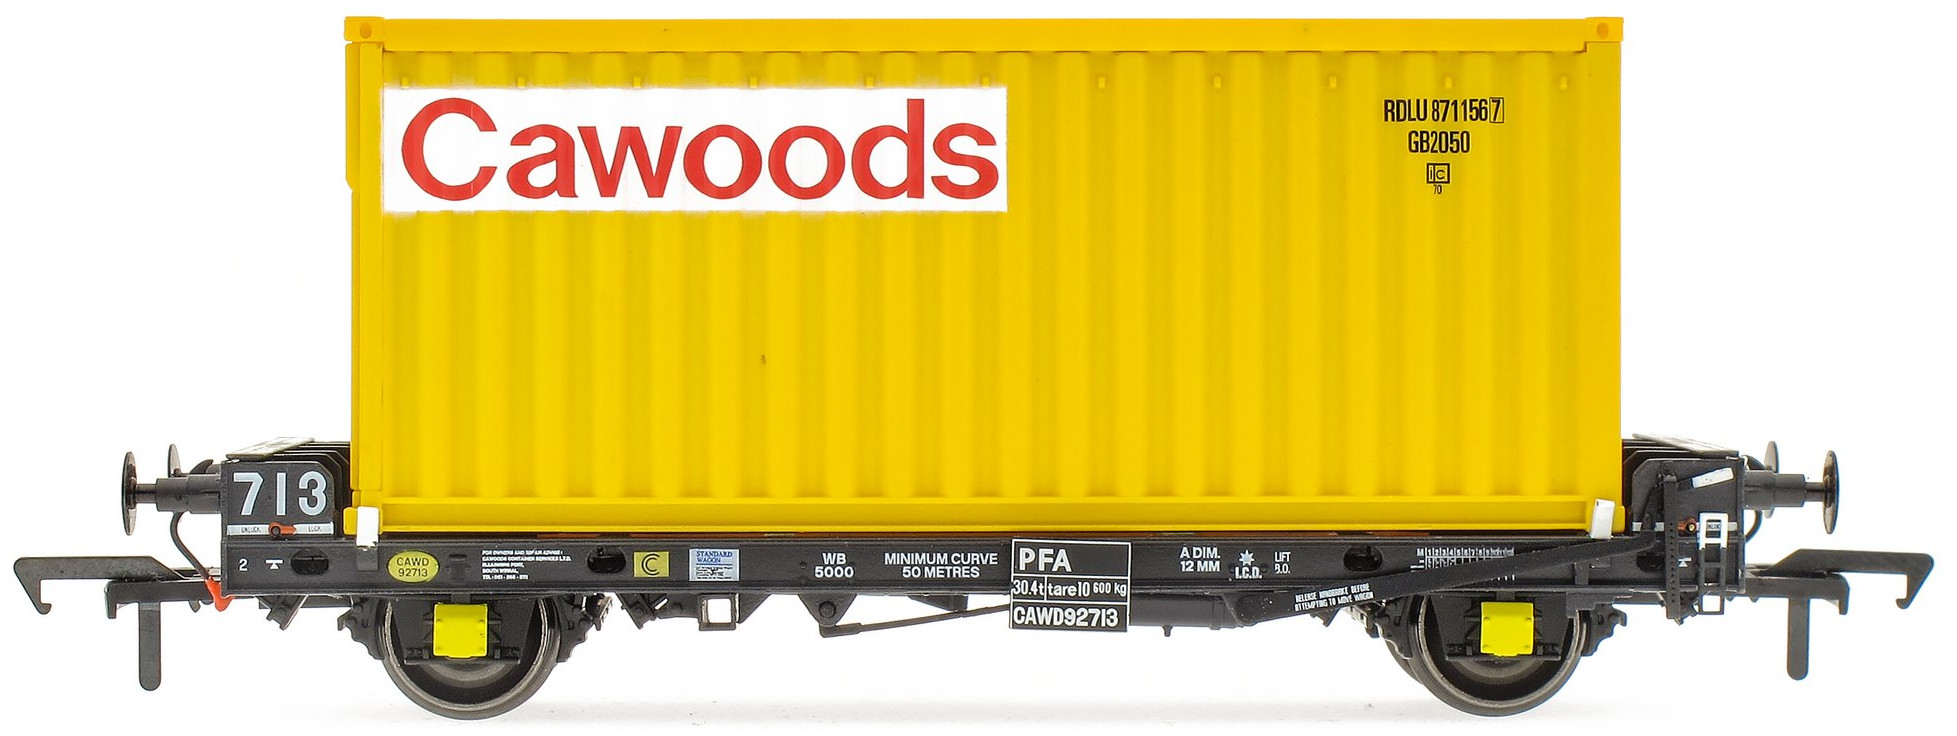 Accurascale ACC2061CWDB Flat Cawoods CAWD92713 Image